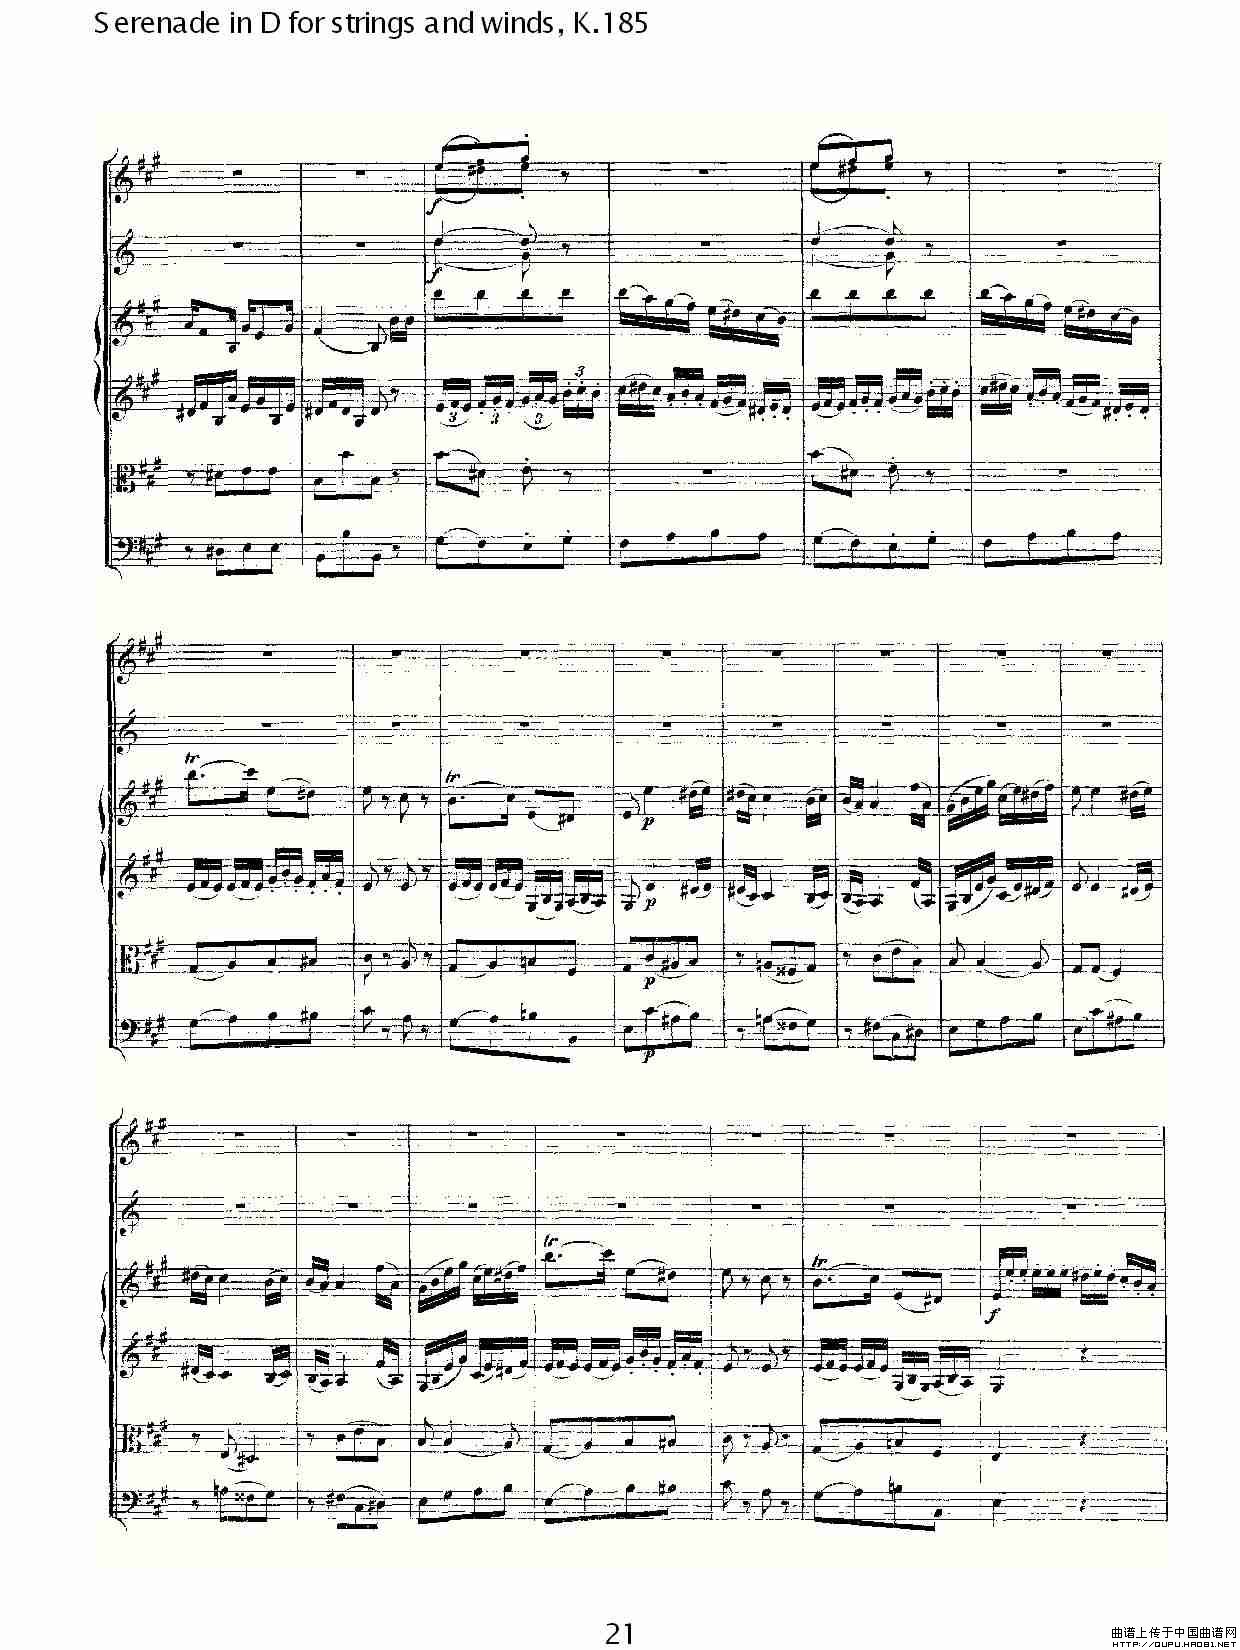 Serenade in D for strings and winds, K.185（D调管弦乐小）